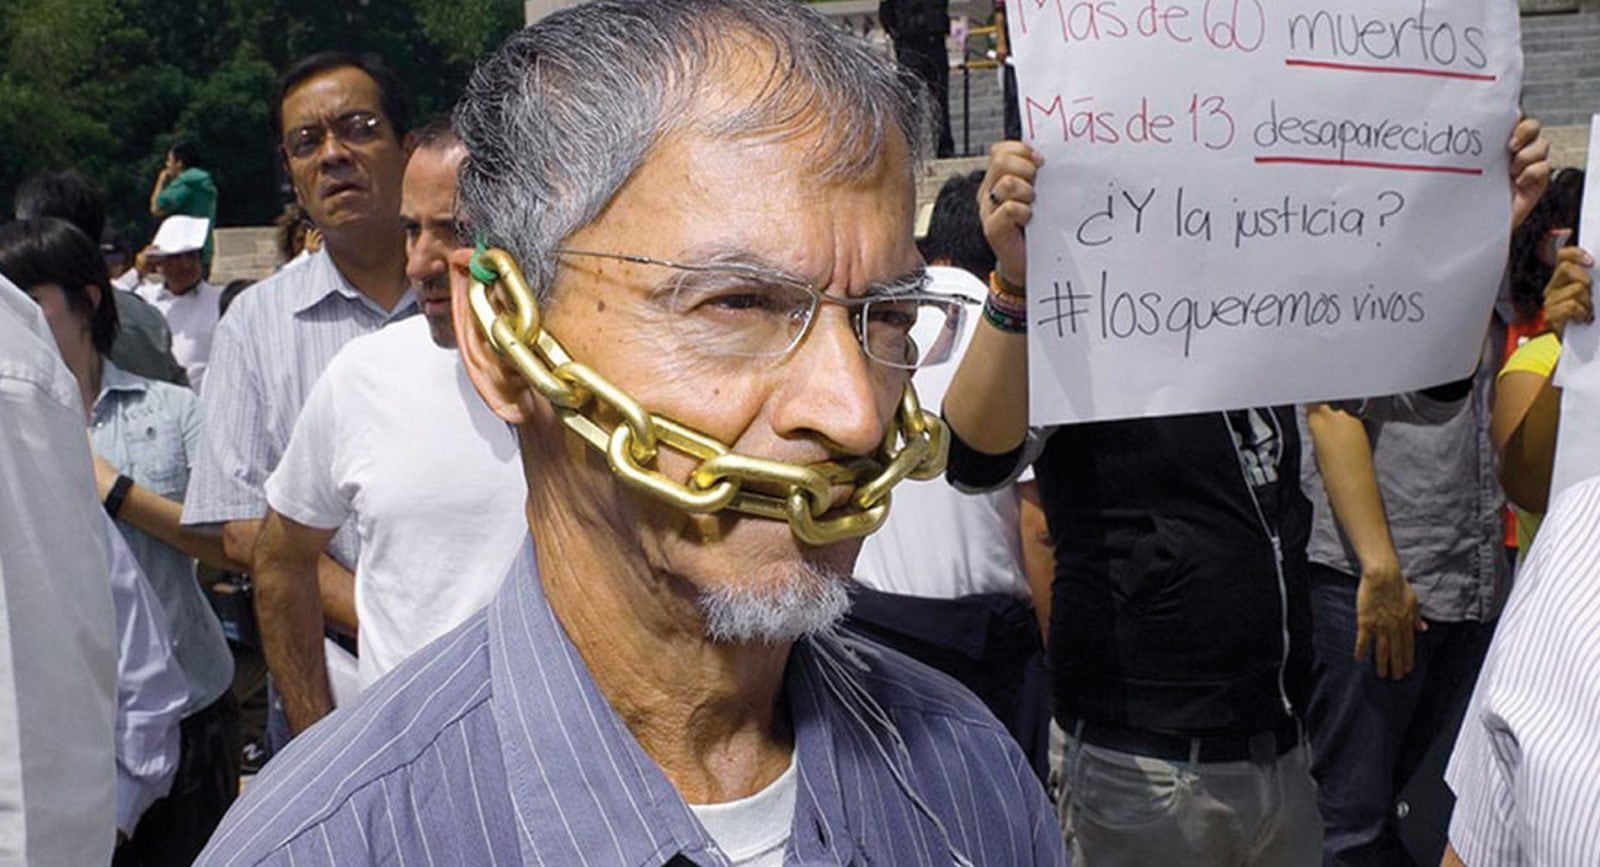 A man with a chain over his mouth protesting attacks on journalists